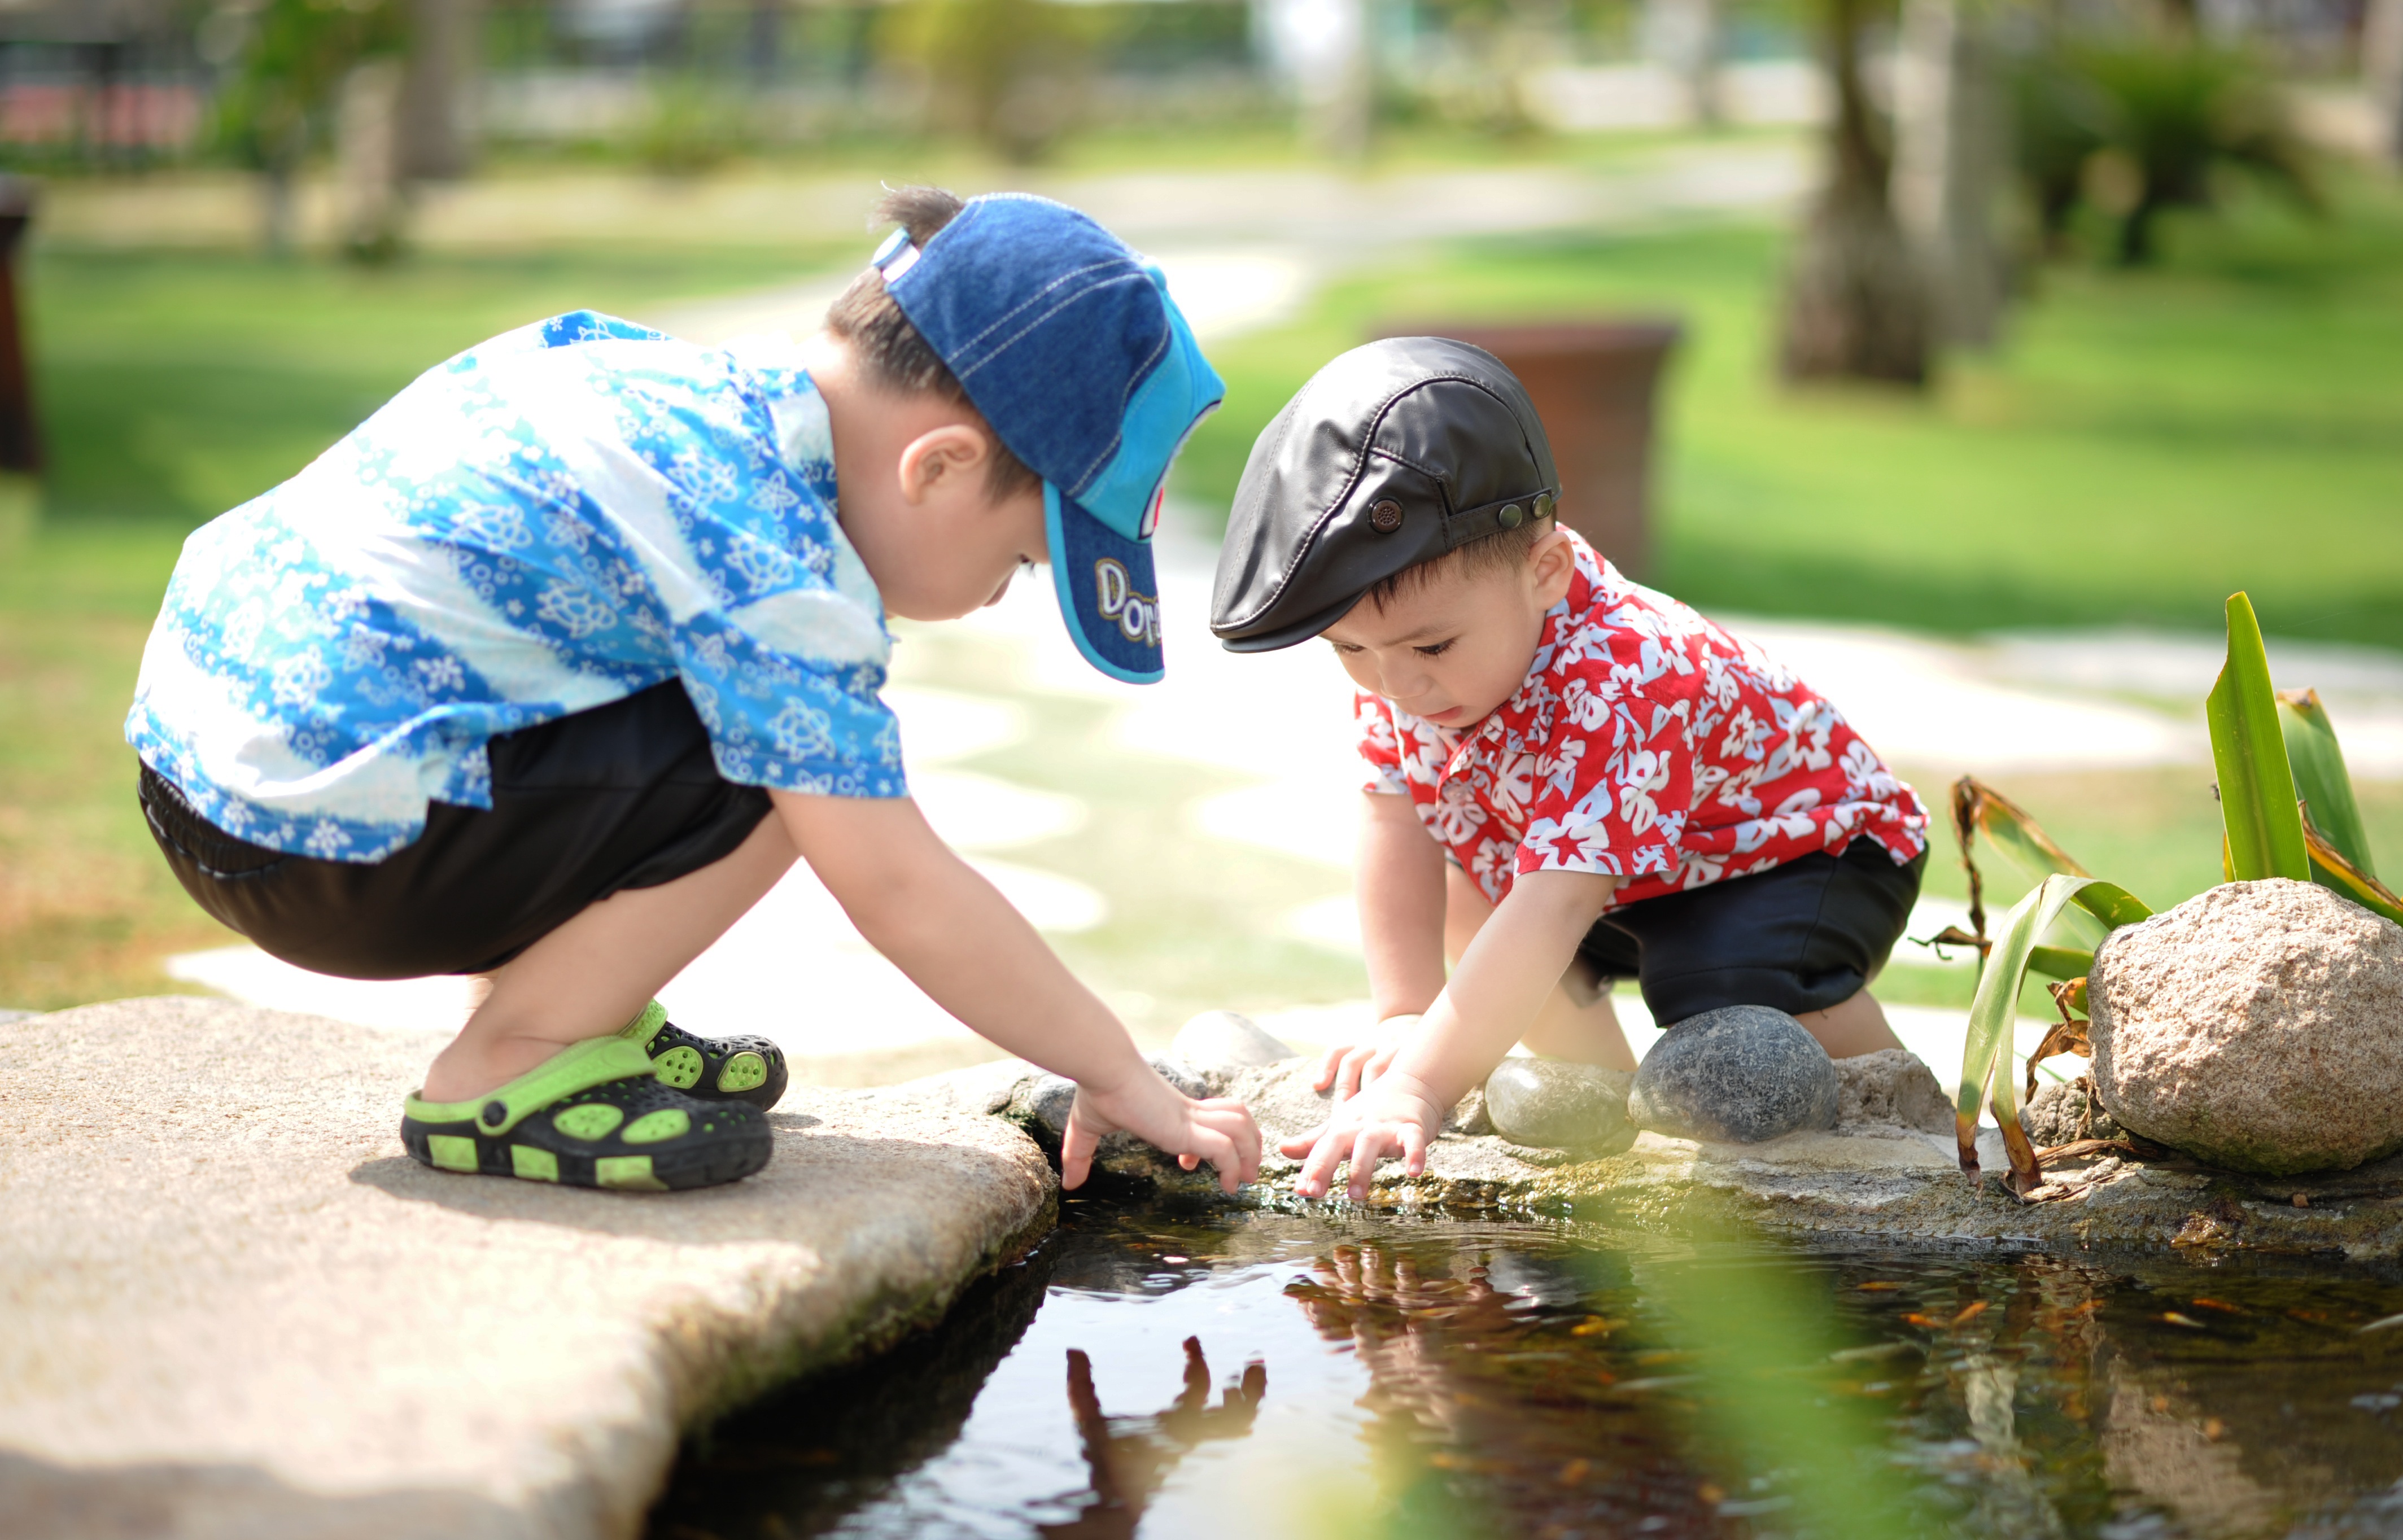 Two boys squatting and playing by a pond